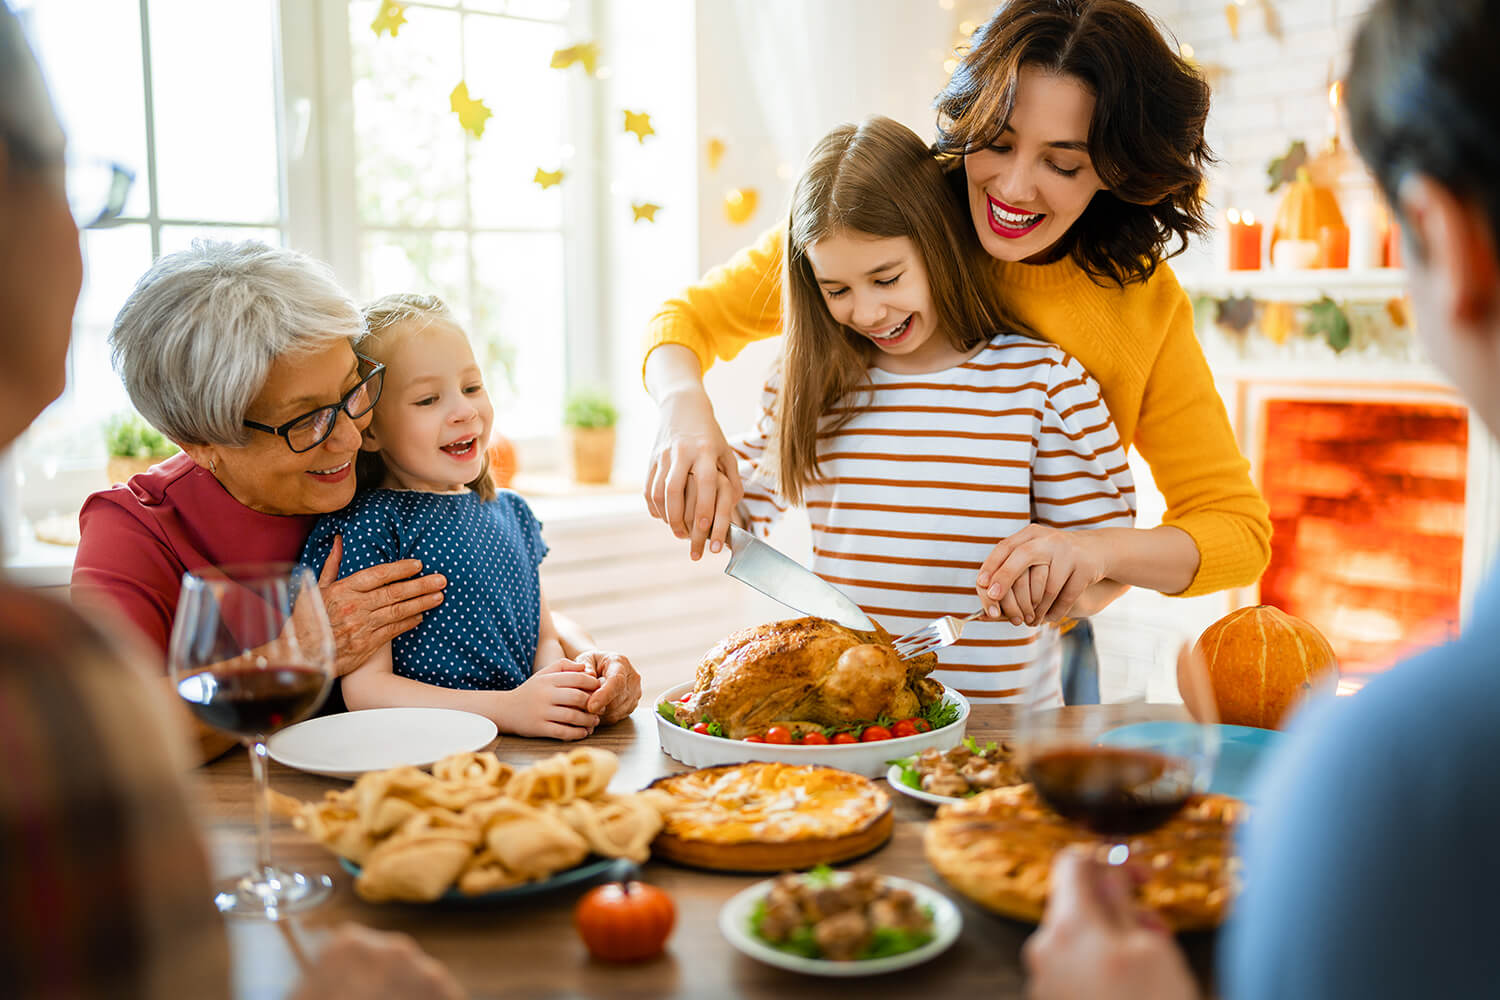 Top 9 Tips for a Happy and Healthy Thanksgiving